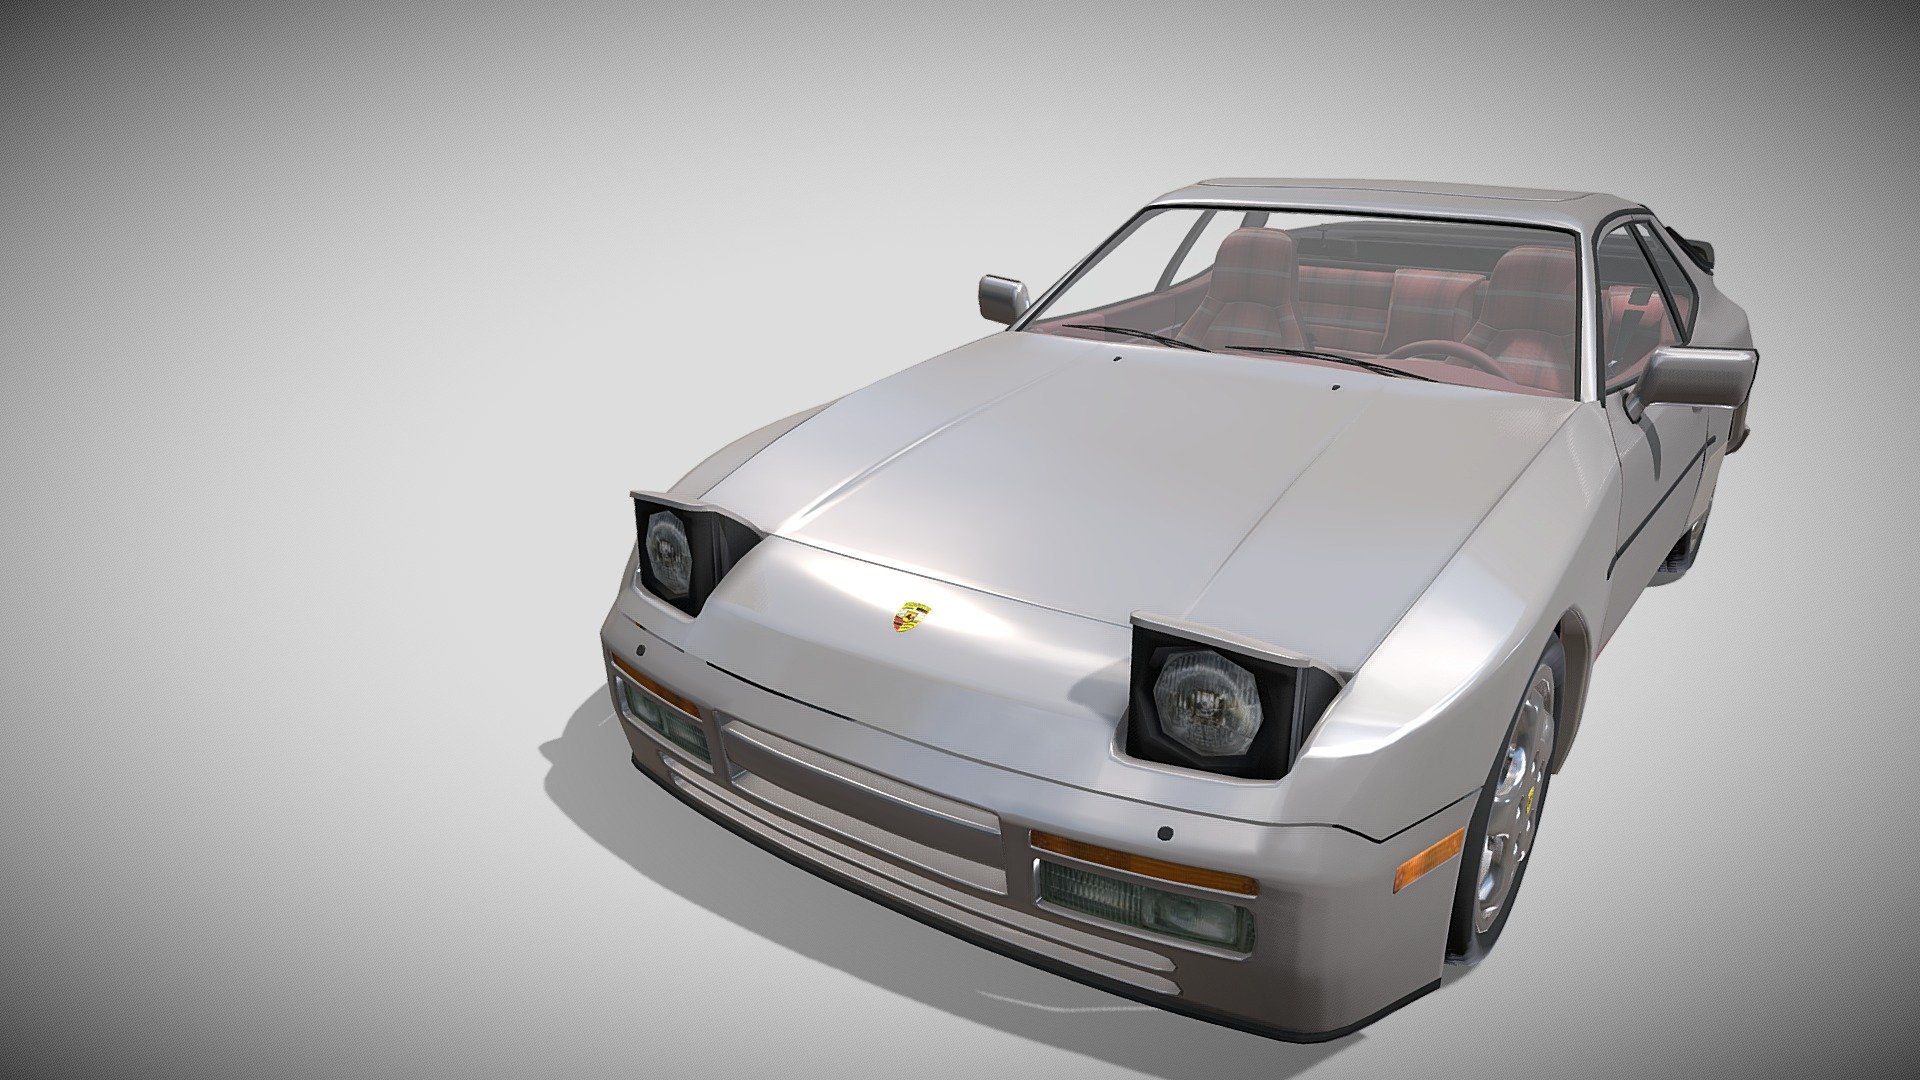 A very accurate model of a Porsche 944 Turbo S with a HIGHLY DETAILED INTERIOR MODELED.

The model comes in five formats:
-.blend, rendered with cycles, as seen in the images;
-.obj, with materials applied and textures;
-.dae, with materials applied and textures;
-.fbx, with materials applied and textures;
-.stl, ready to print in 3D;

This 3d model was originally created in Blender 2.76 and rendered with Cycles.
The model has materials applied in all formats, and are ready to import and render.
The model is built strictly out of quads and is subdivisable:

It comes in separate parts, named correctly for the sake of convenience.

For any problems please feel free to contact me.

Don't forget to rate and enjoy! - Porsche 944 Turbo S with interior rev - Buy Royalty Free 3D model by dragosburian 3d model